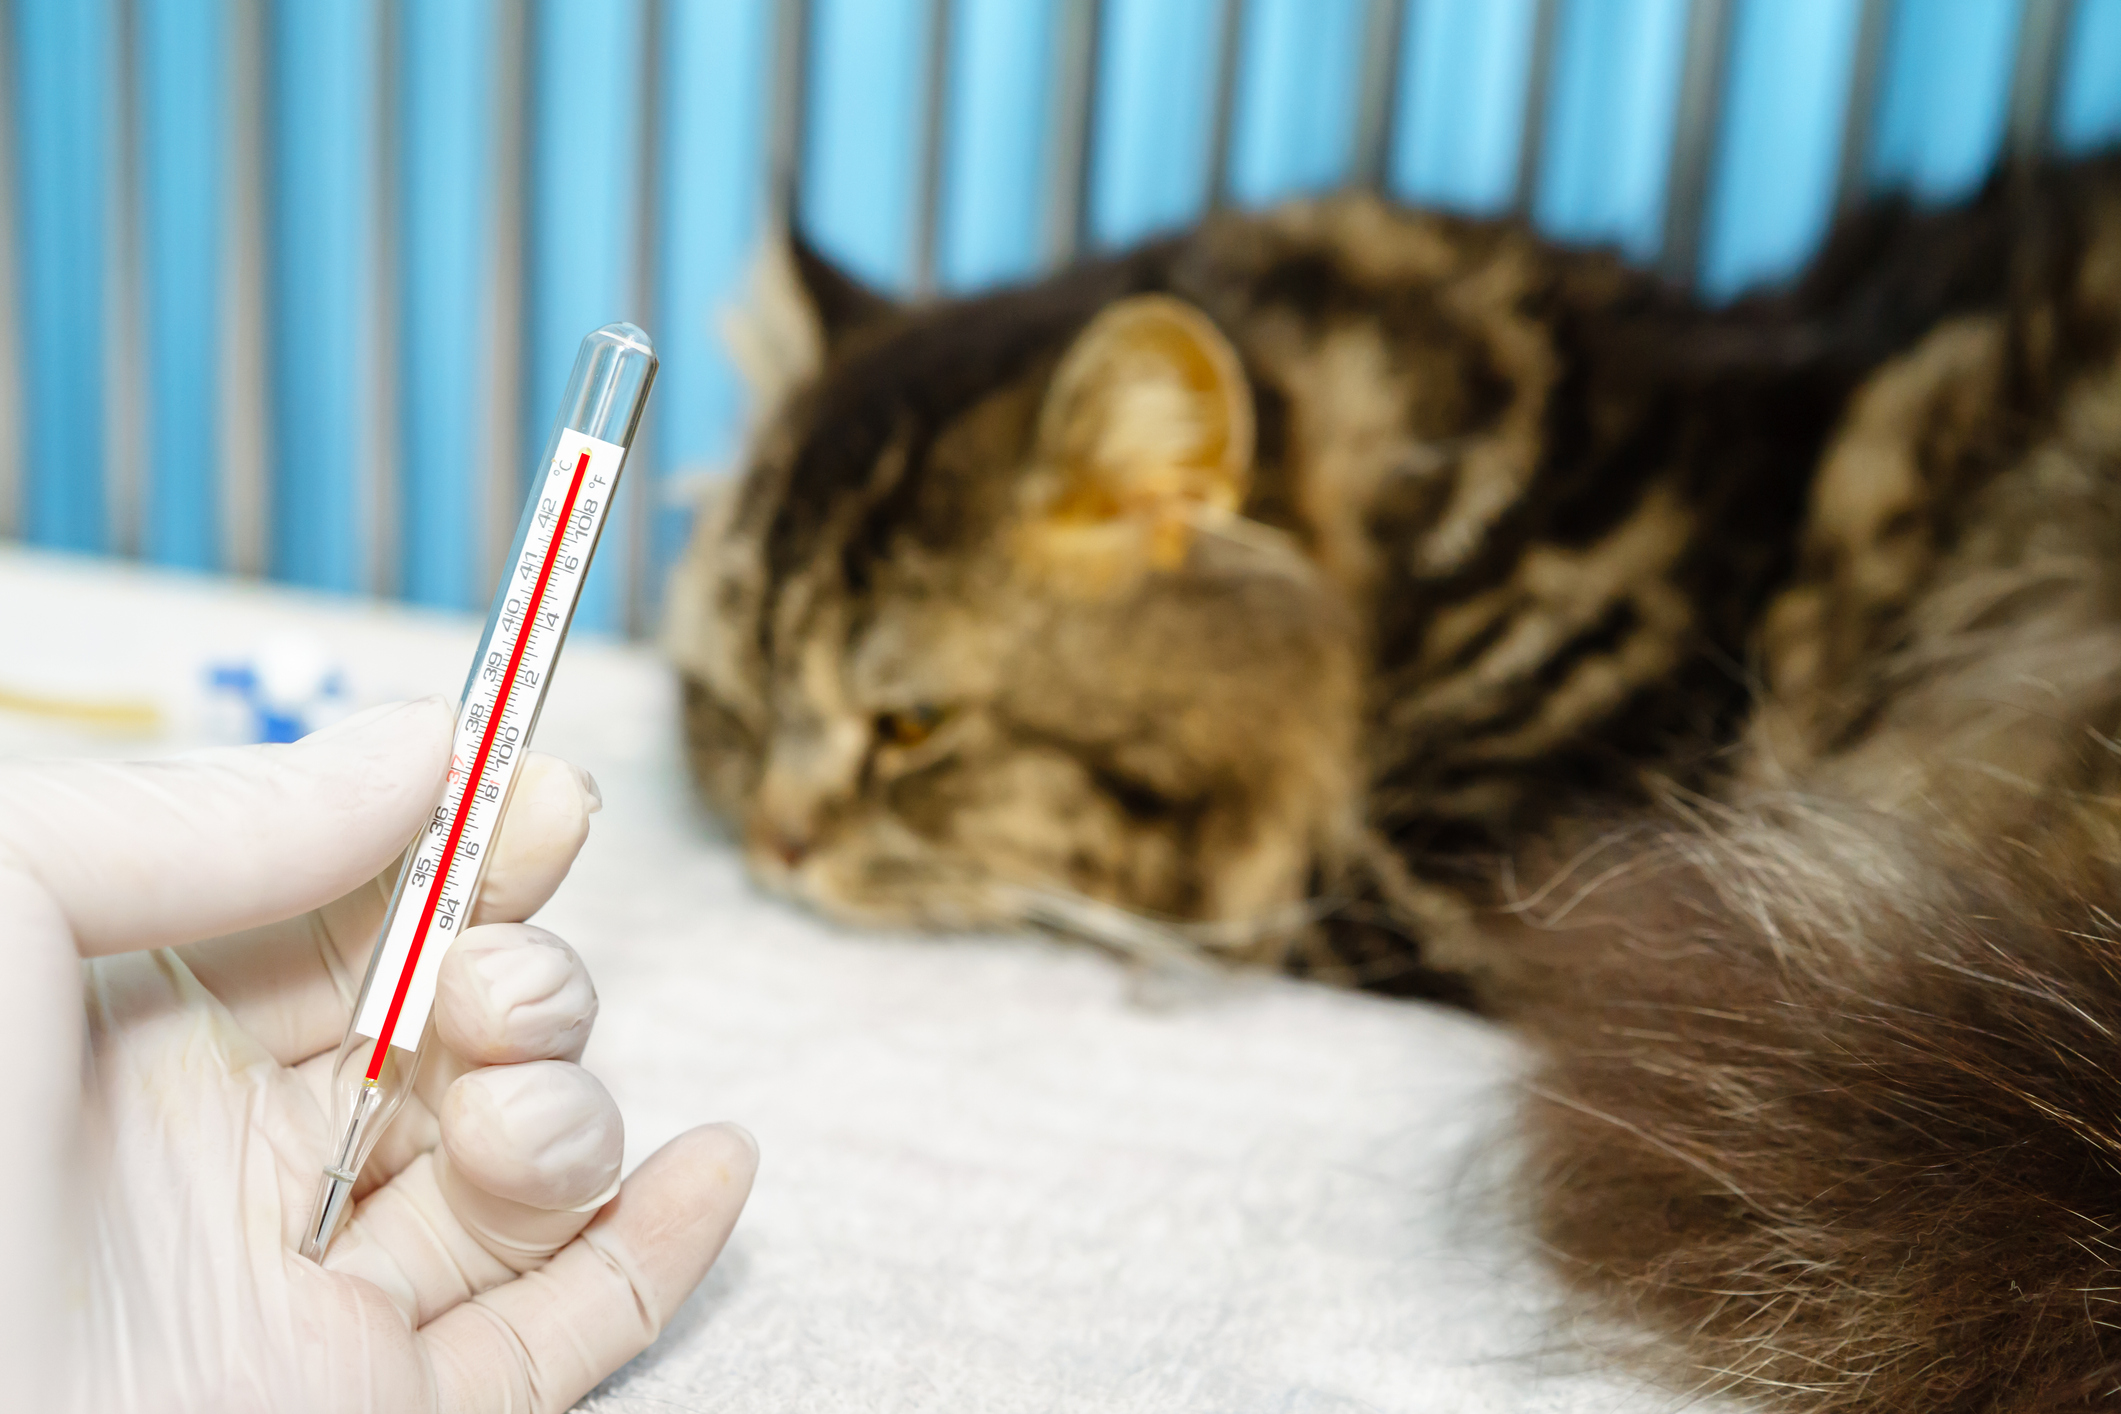 Maine coon cat gets his temperature taken at the vet